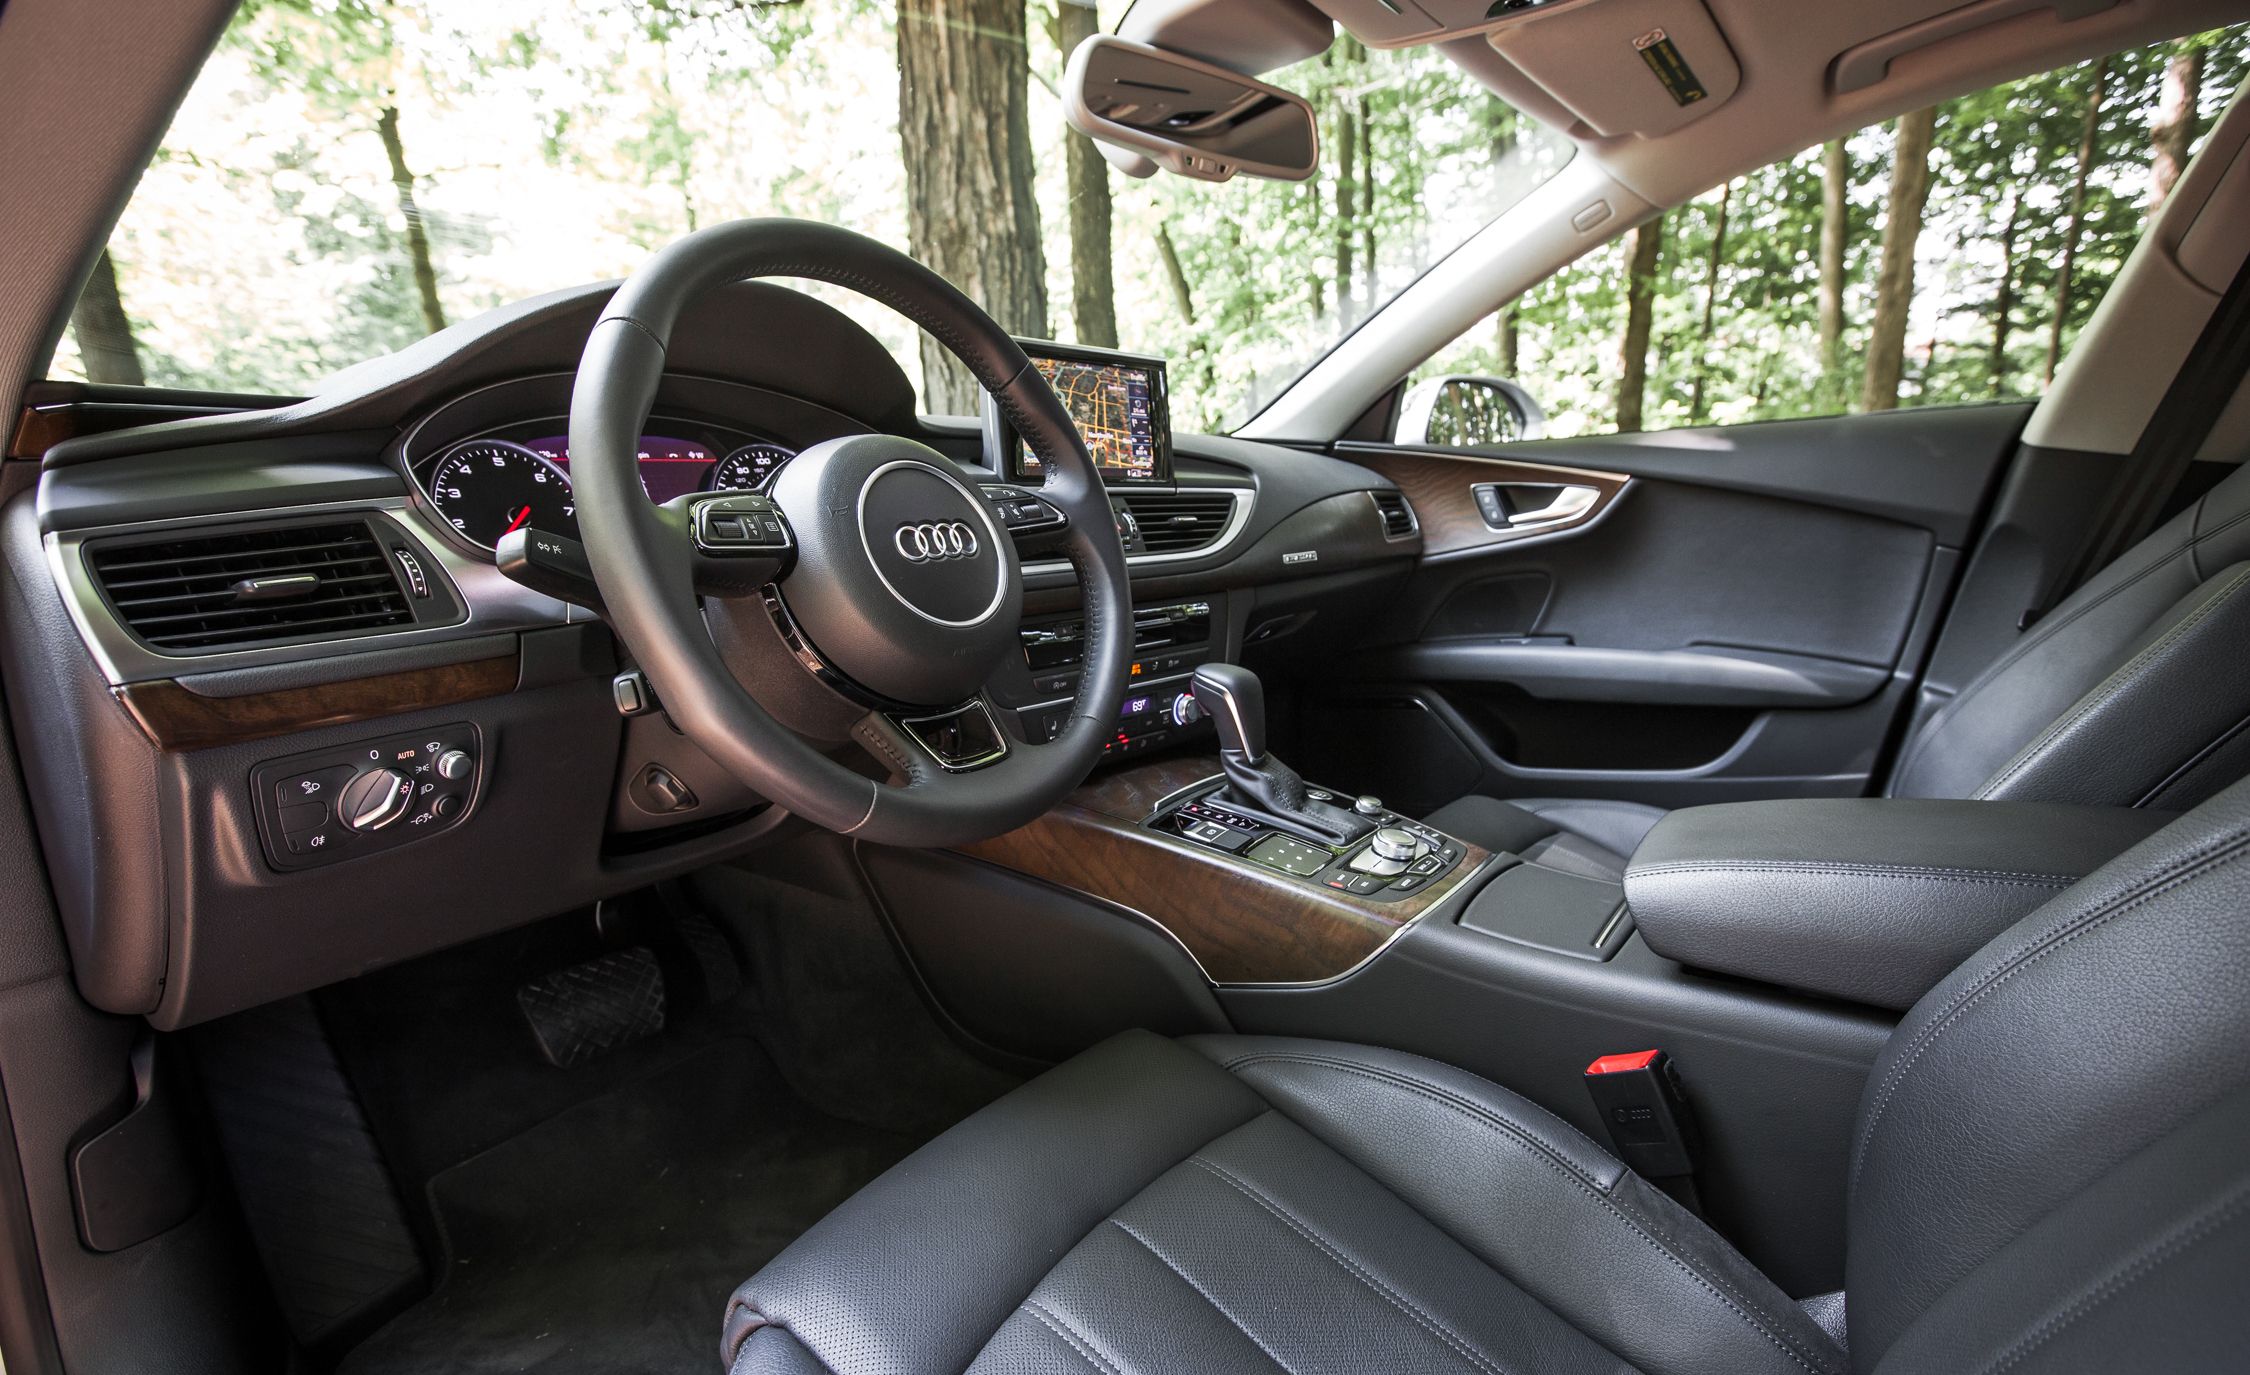 2016 Audi A7 Interior Cockpit And Dash (View 15 of 26)